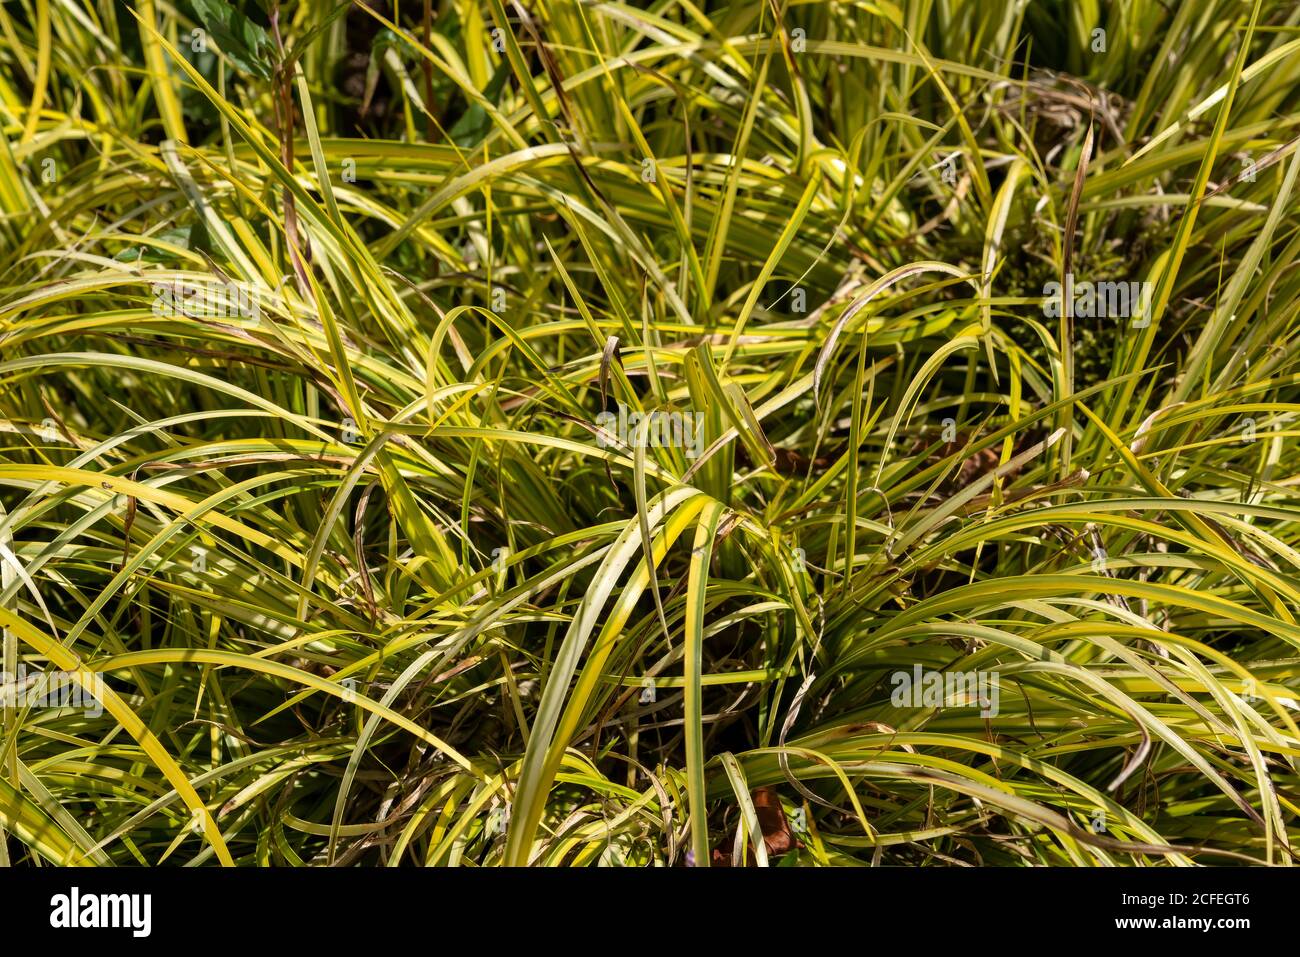 Acorus gramineus 'Oron' an evergreen plant commonly known as Japanese sweet flag or Golden Japanes Rush stock photo image Stock Photo